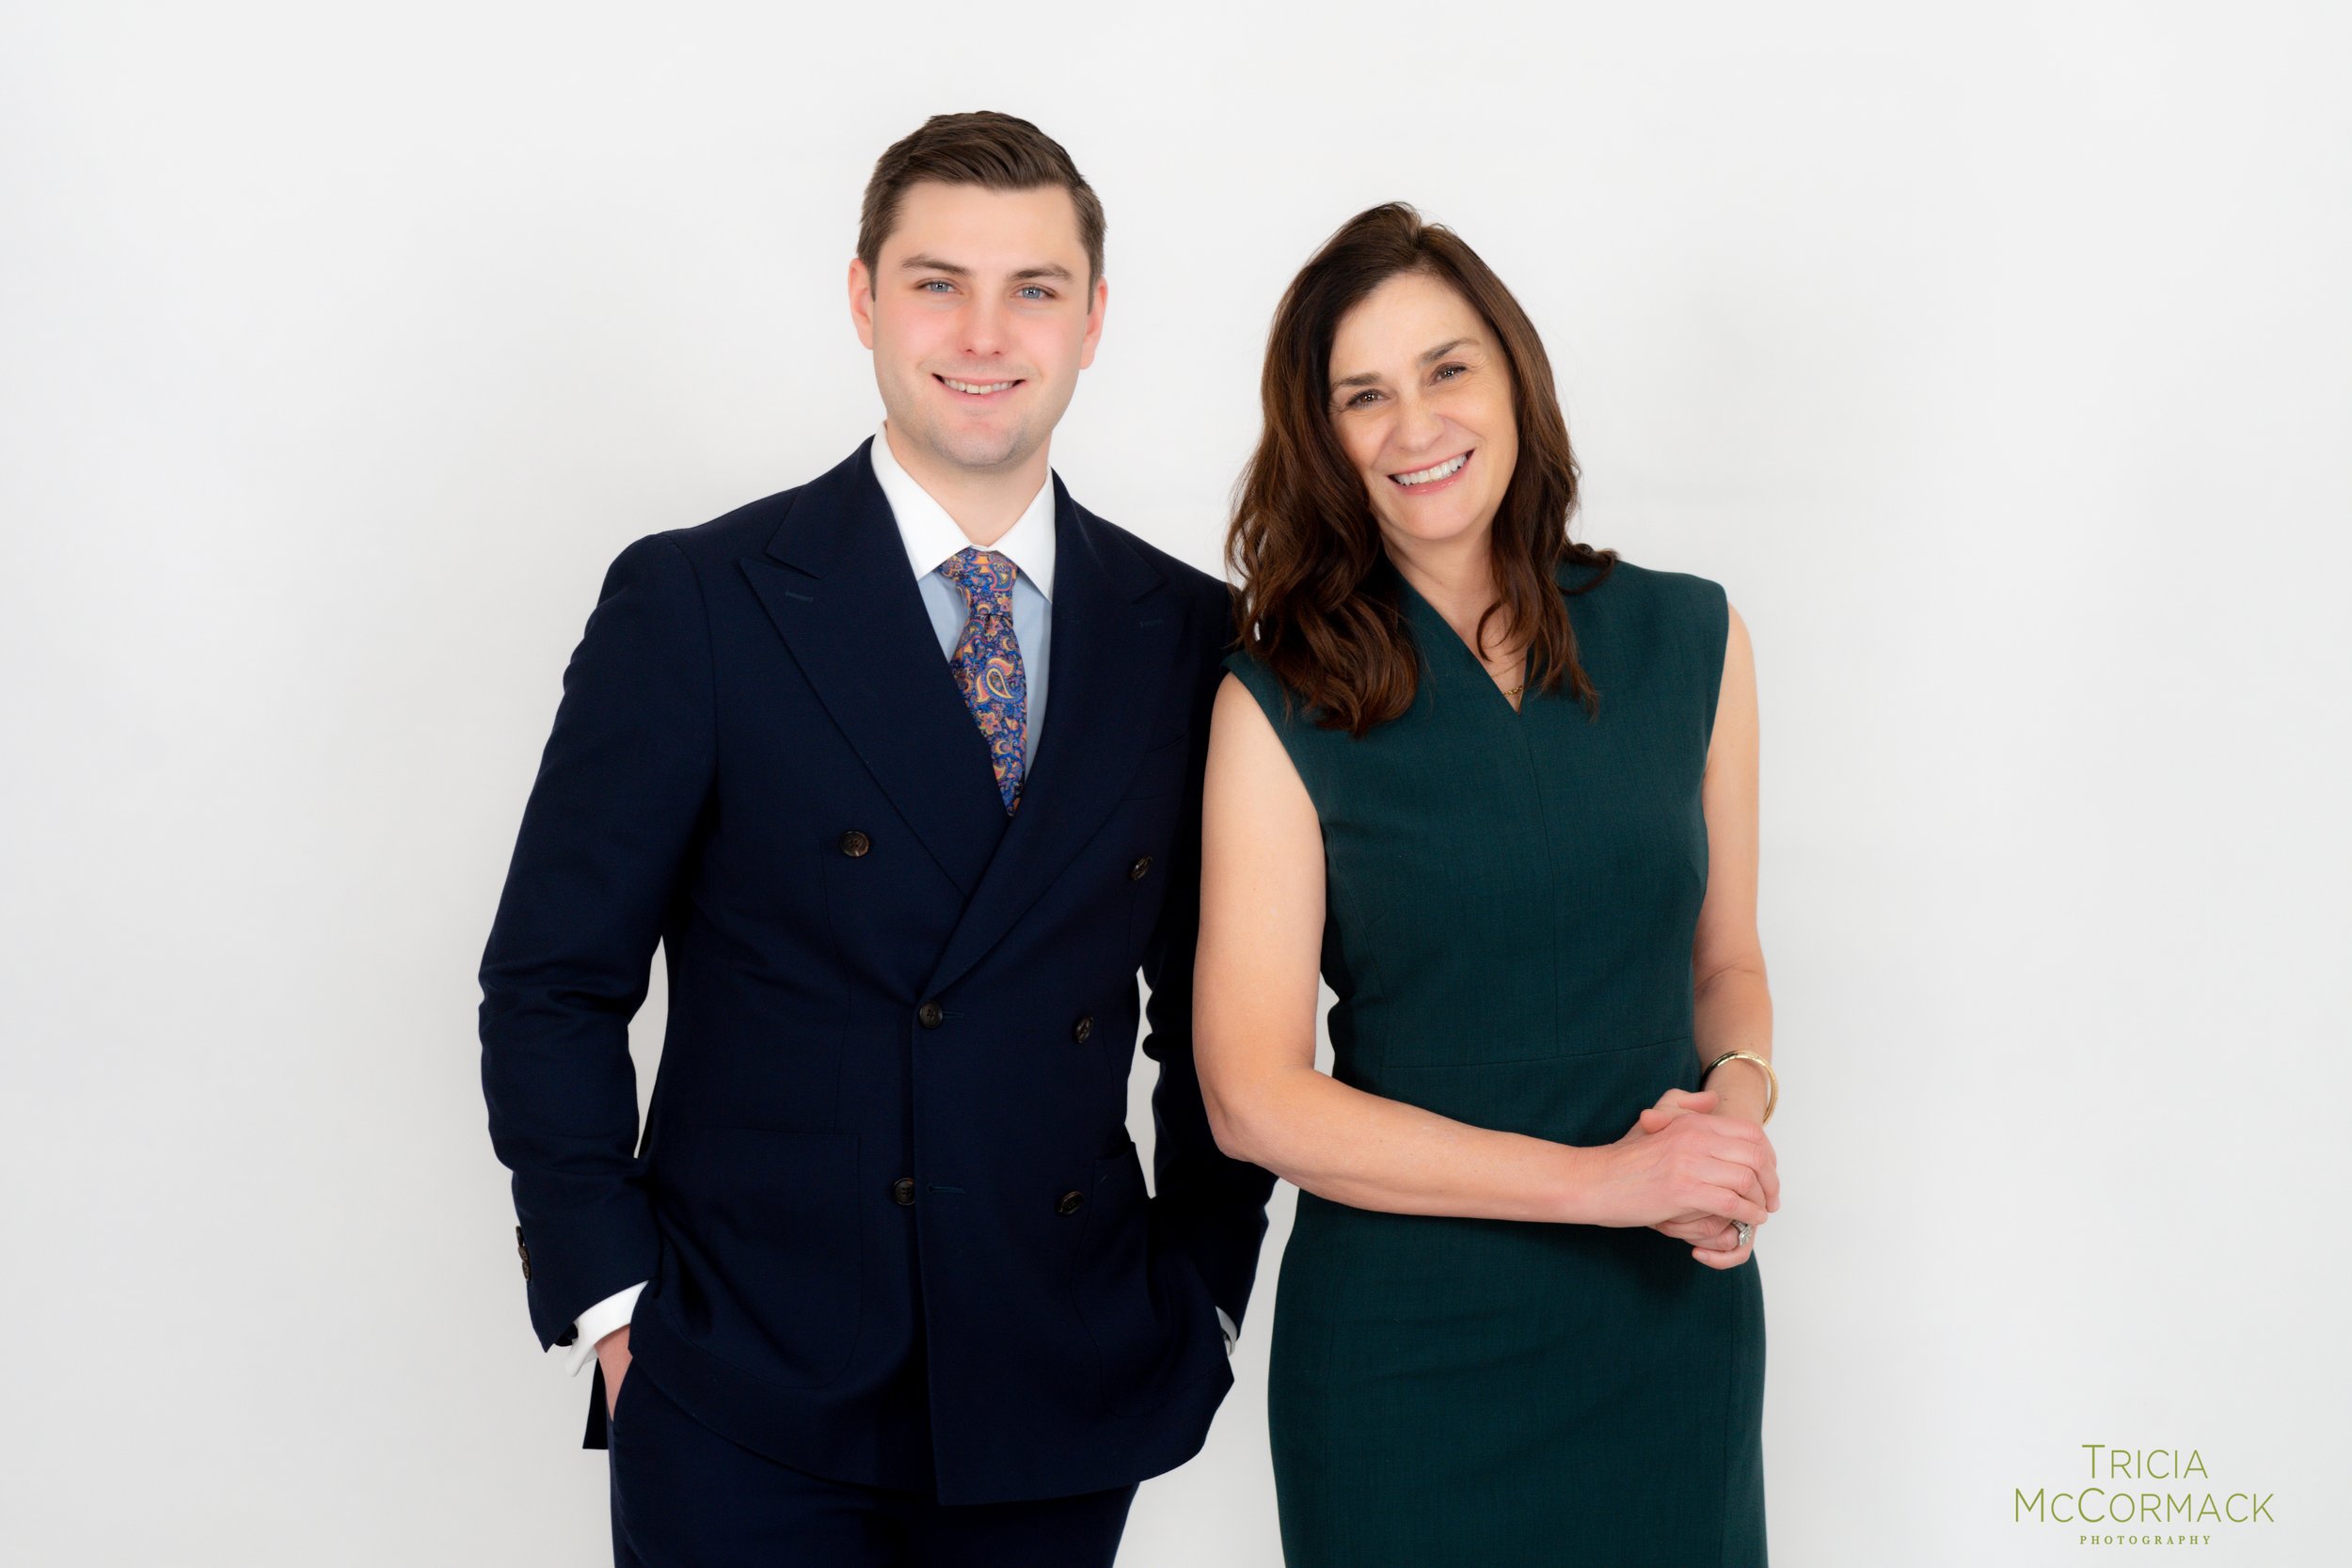 Pearson Wallace Insurance: Beth-President and Alex-Partner